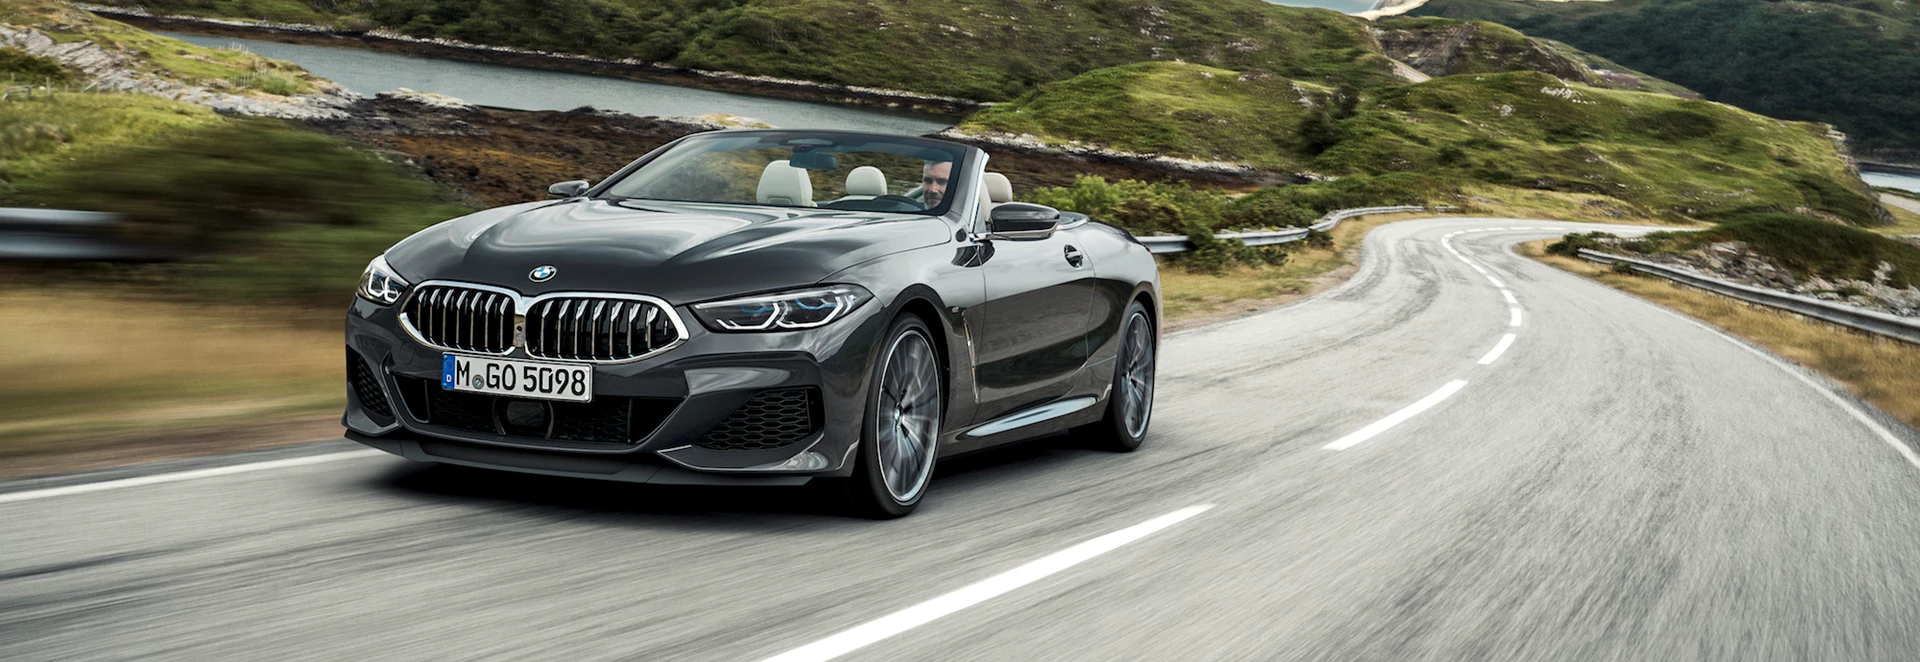 BMW 8 Series Convertible revealed 